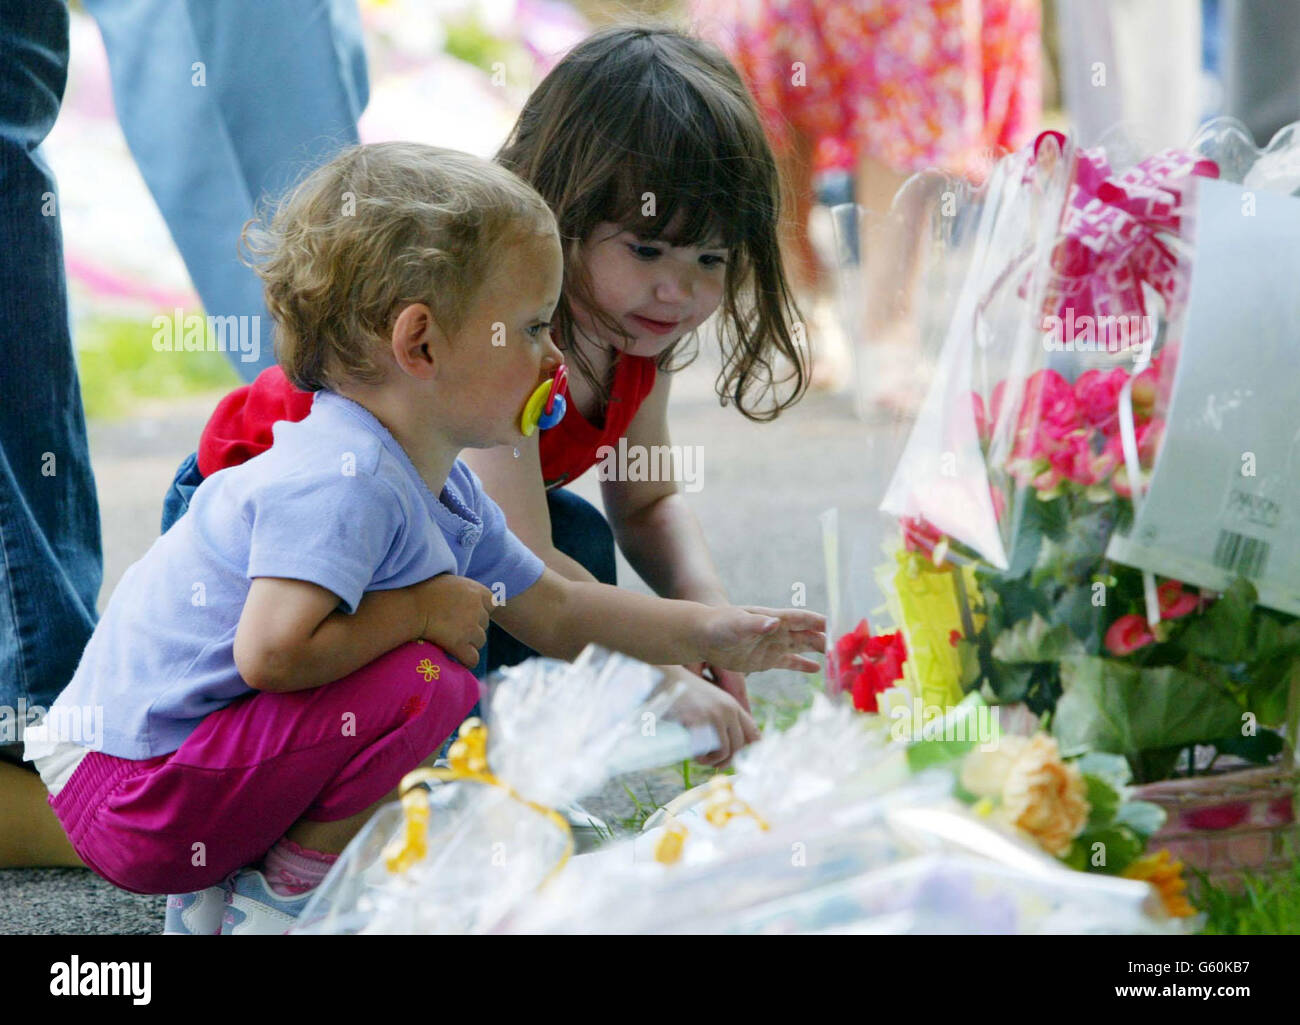 People lay flowers at St. Andrews Church, Soham, Cambs, for the murdered schoolgirls Holly Wells & Jessica Chapman. Stock Photo